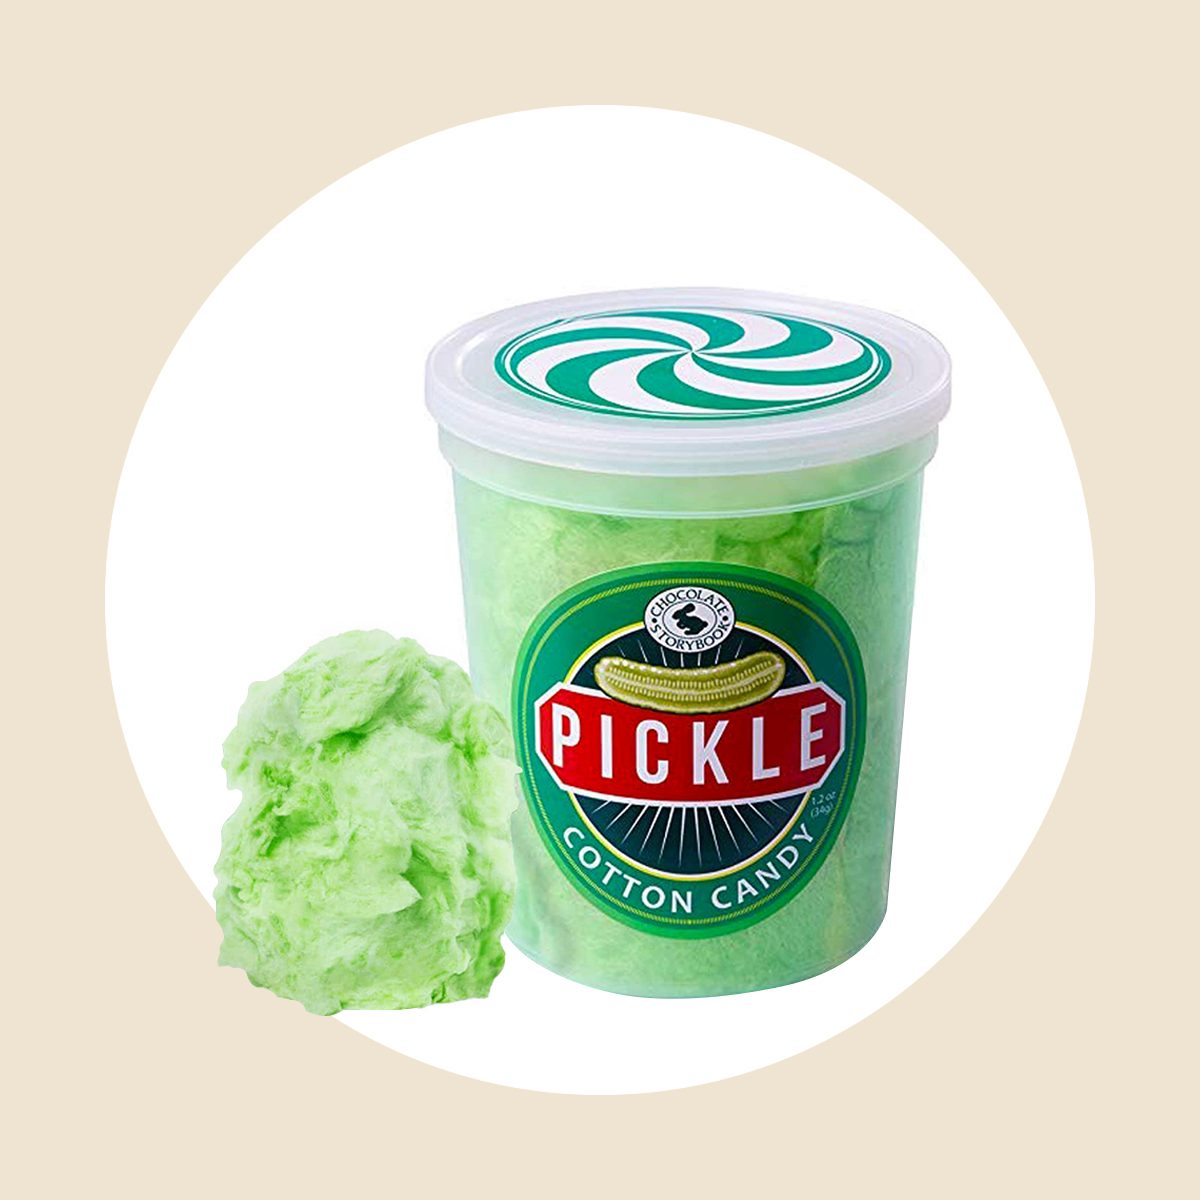 Pickle Gourmet Flavored Cotton Candy Ecomm Amazon.com